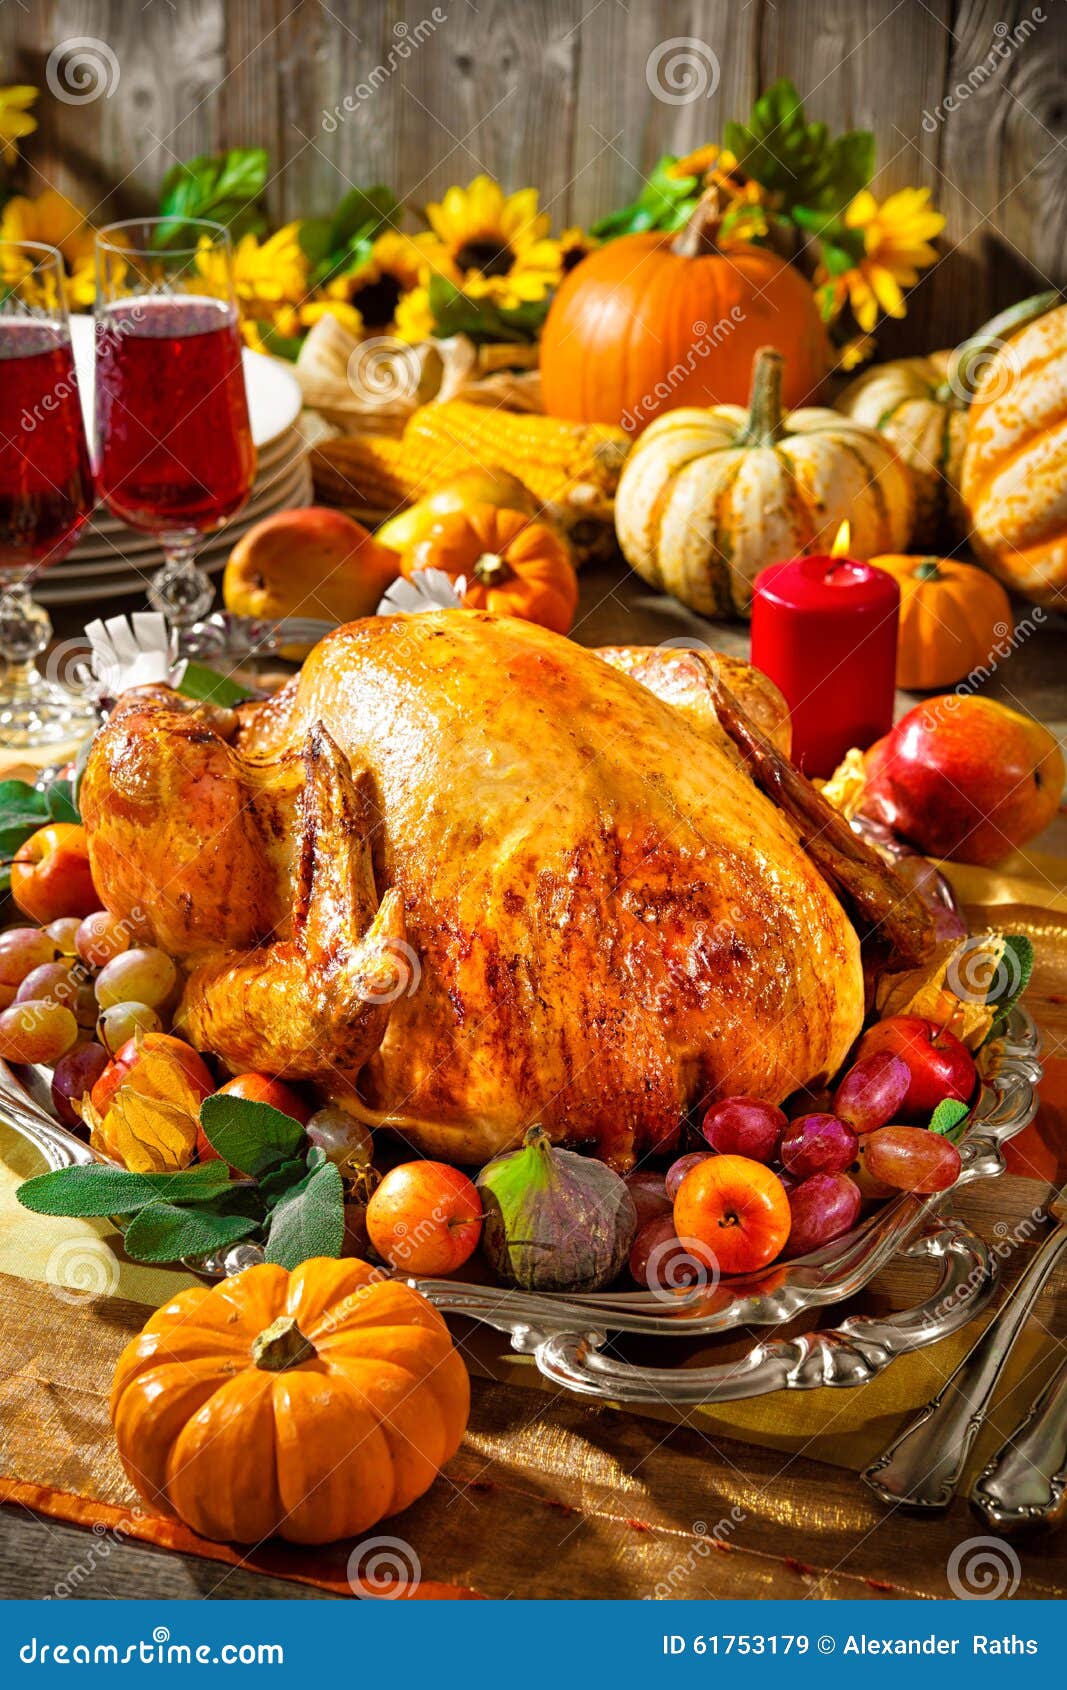 Thanksgiving turkey stock image. Image of cooked, garnished - 61753179